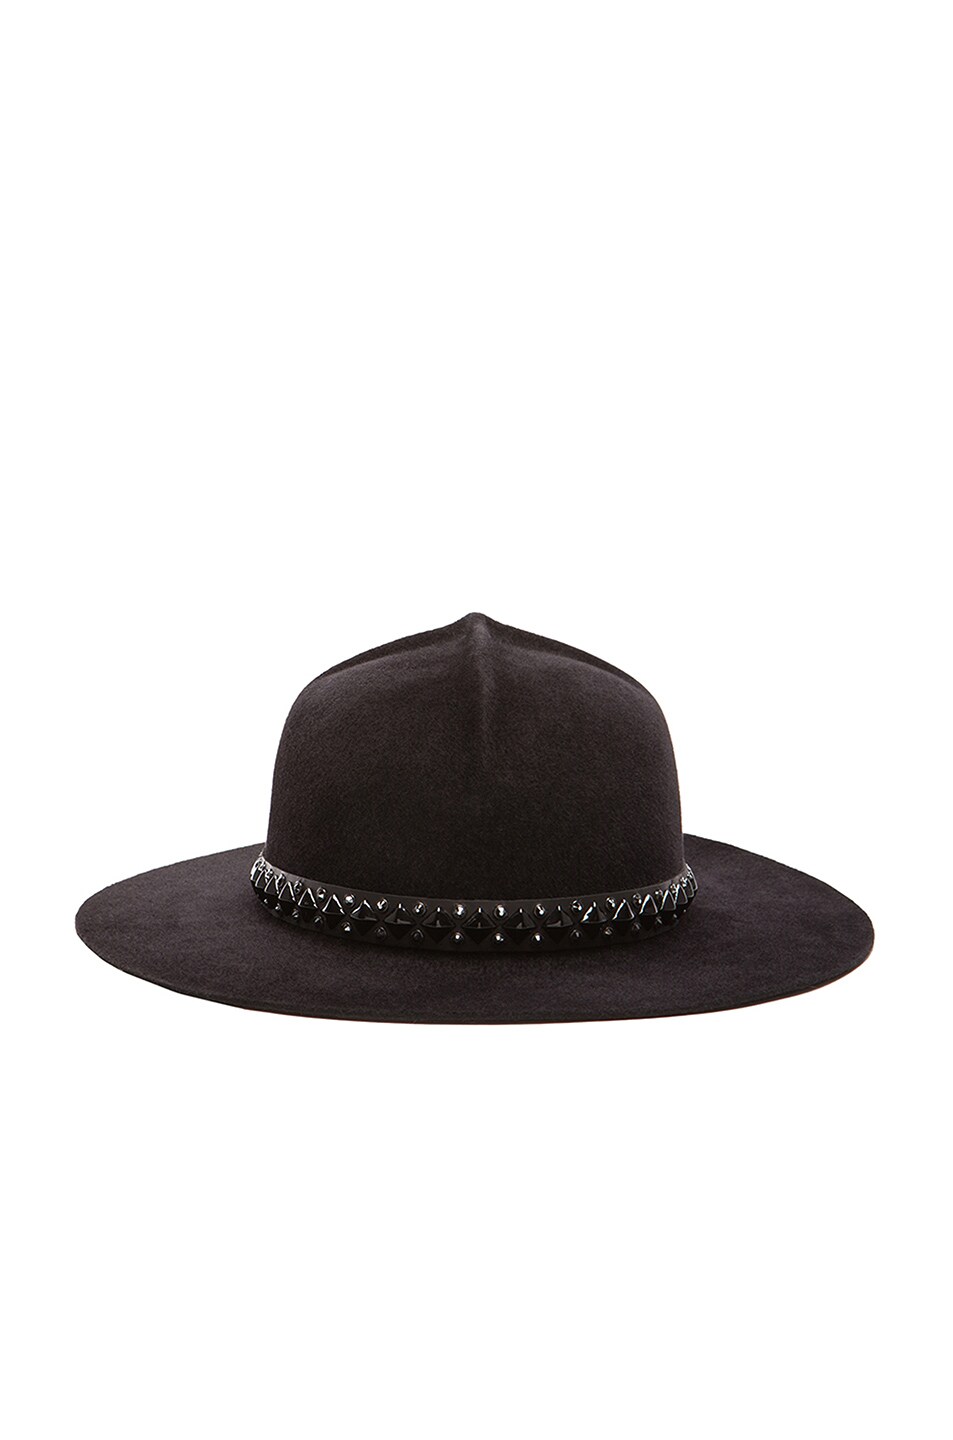 Image 1 of Gladys Tamez Millinery Saint Nicholas Hat in Charcoal Grey